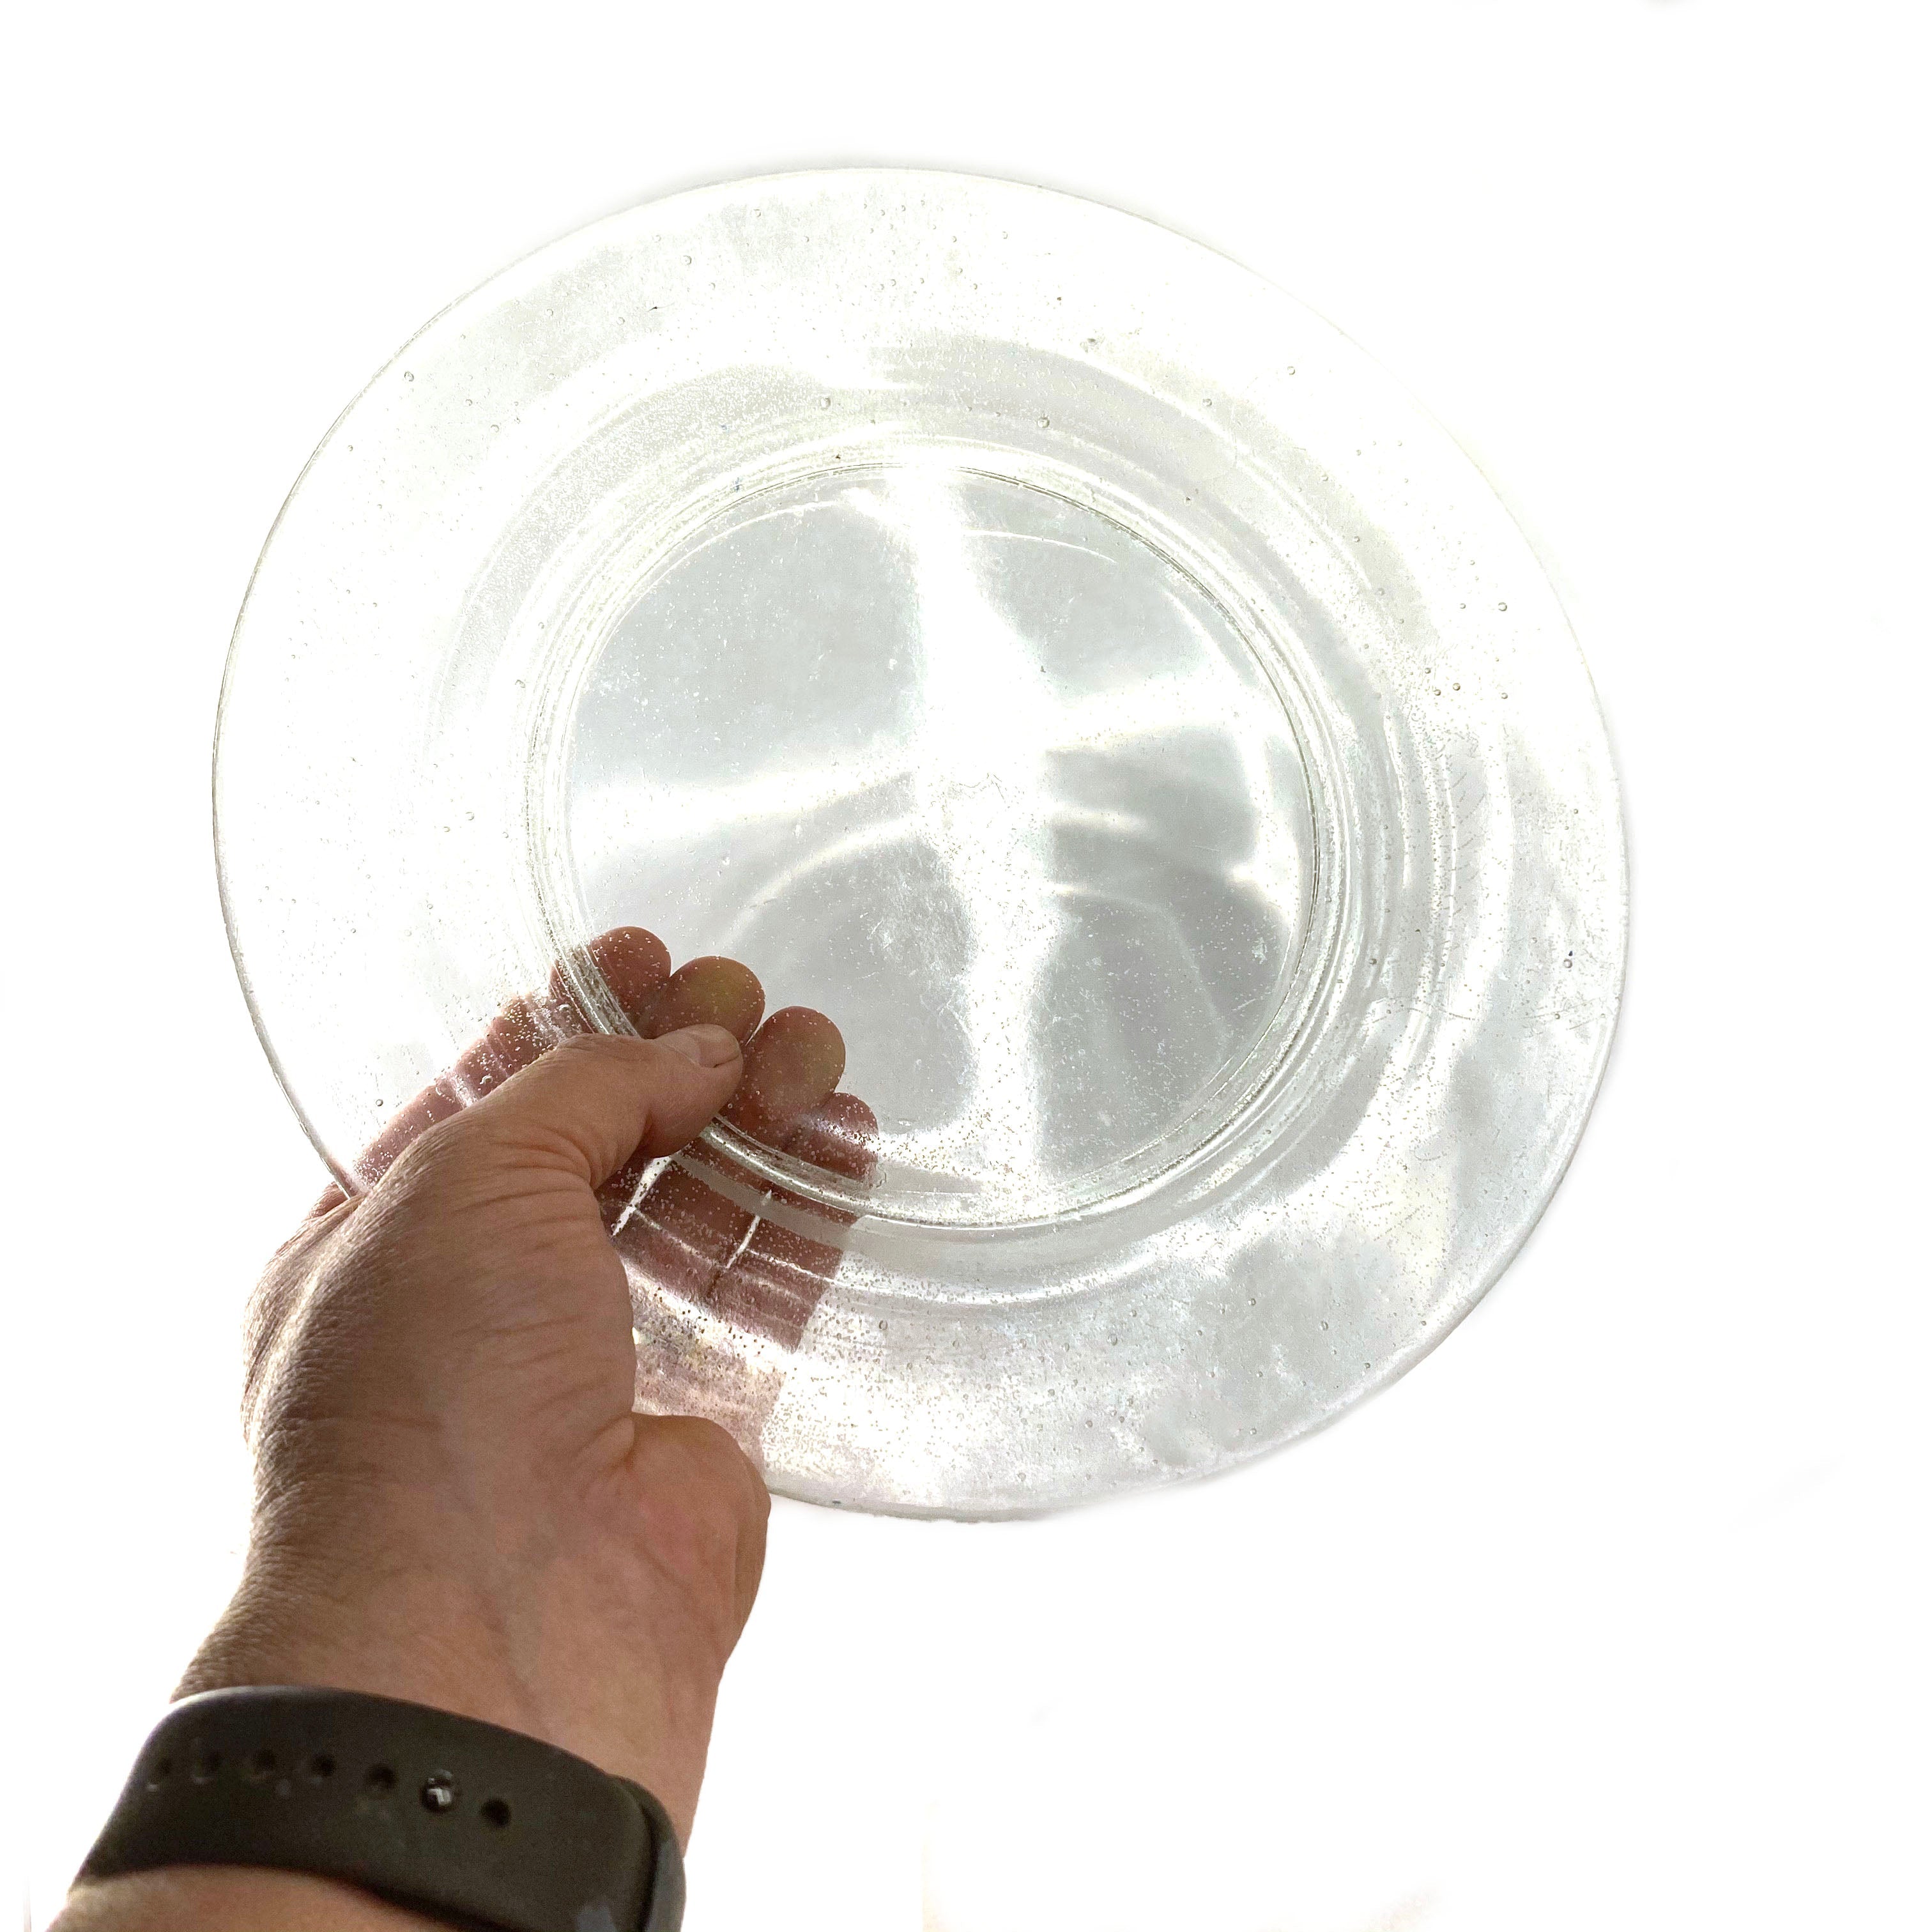 SMASHProps Breakaway Large Dinner Plate - CLEAR - Clear,Translucent